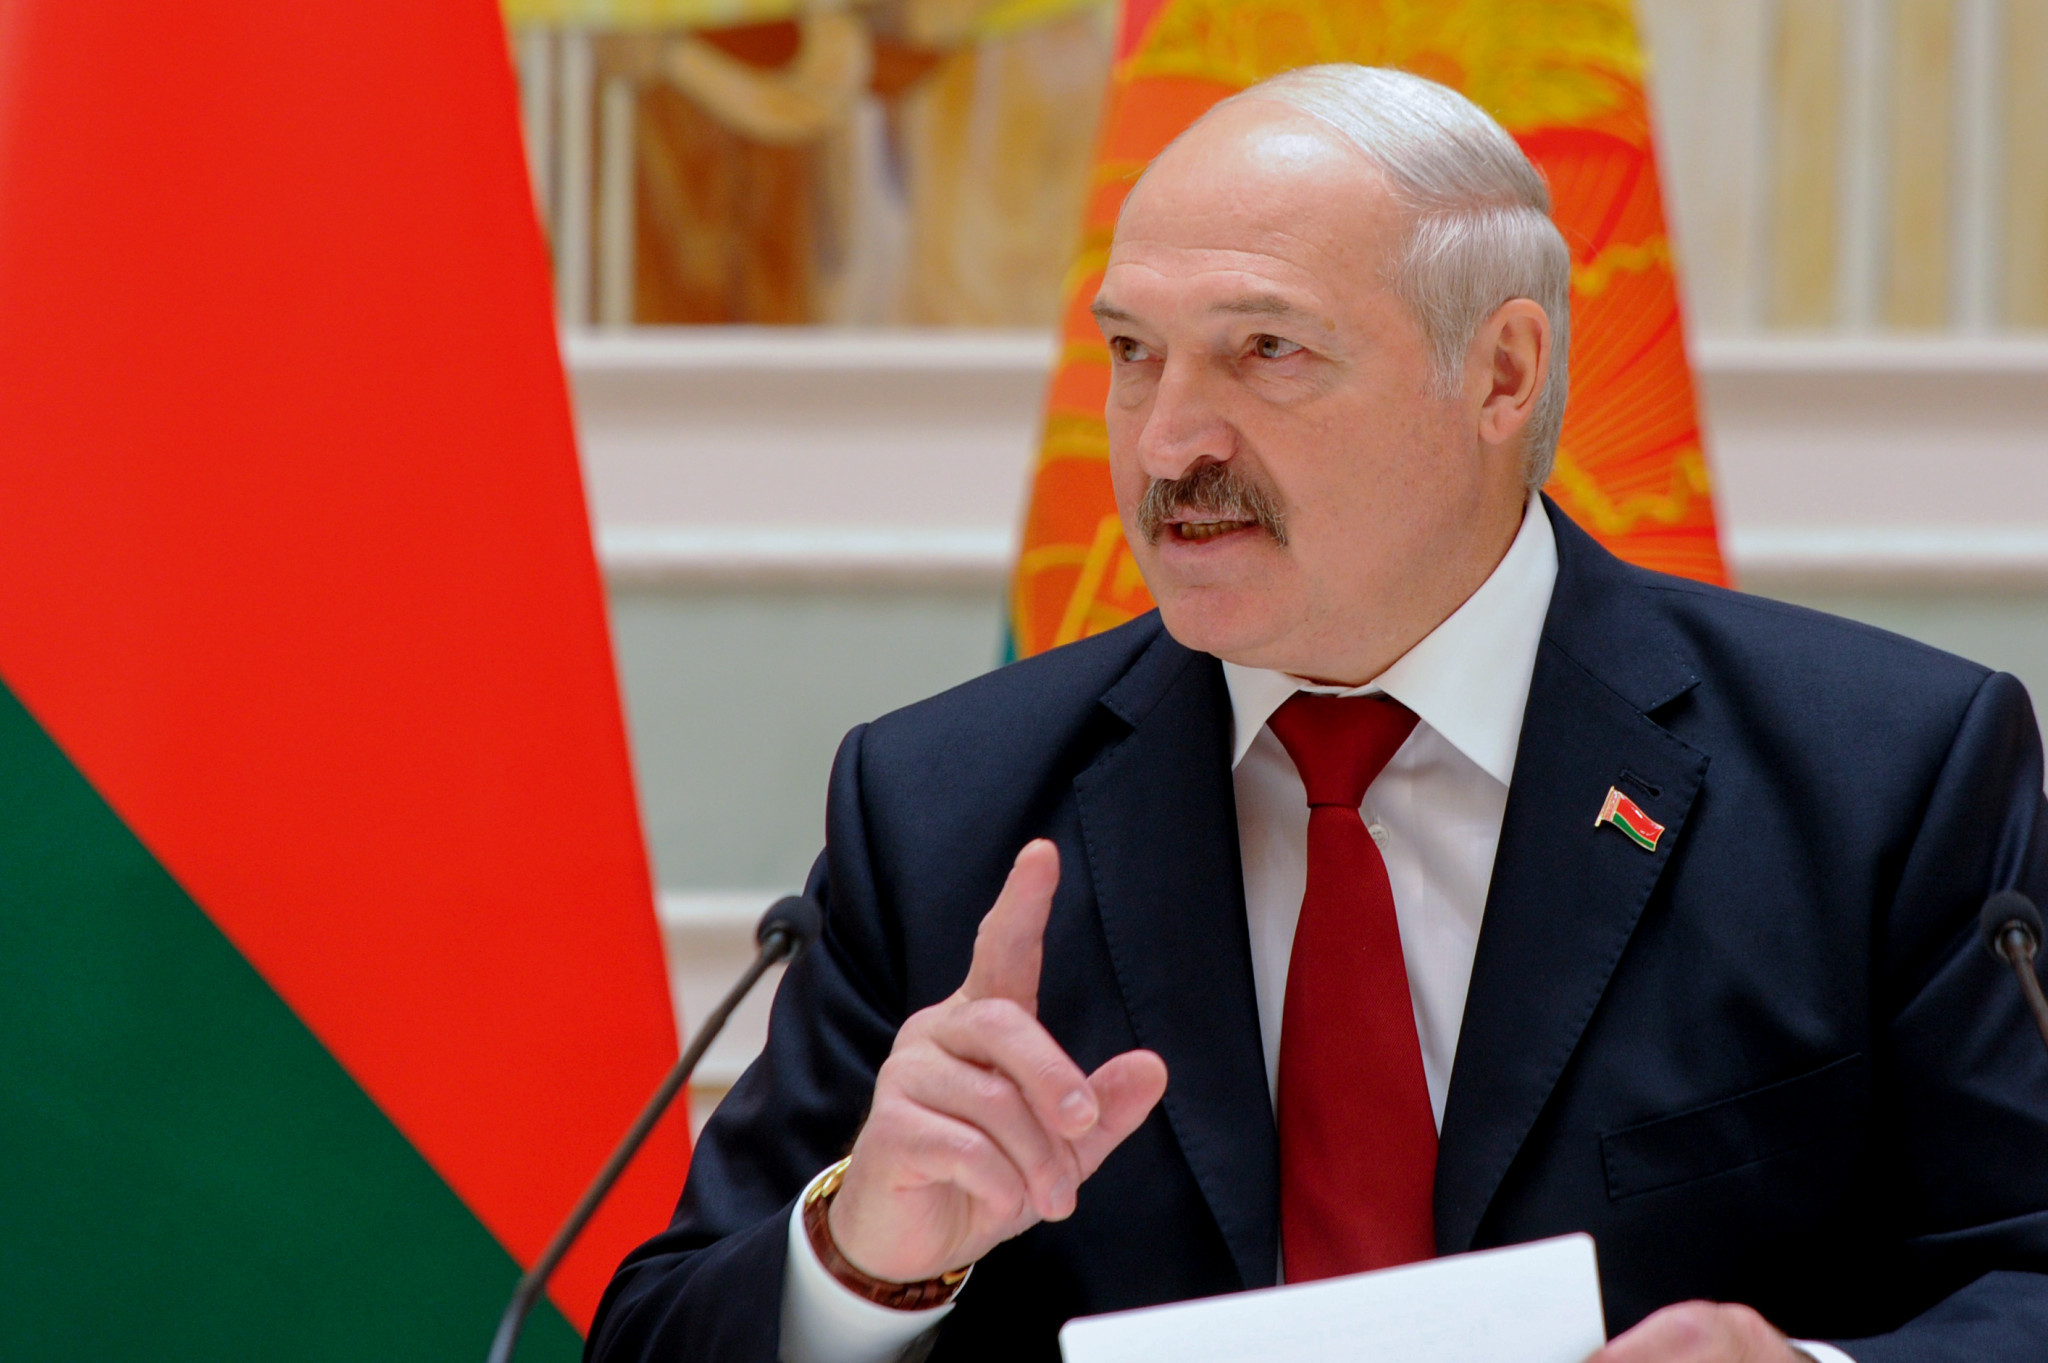 The invitation came from Belarus President Alexander Lukashenko who has welcomed several foreign leaders to the host city ©Getty Images